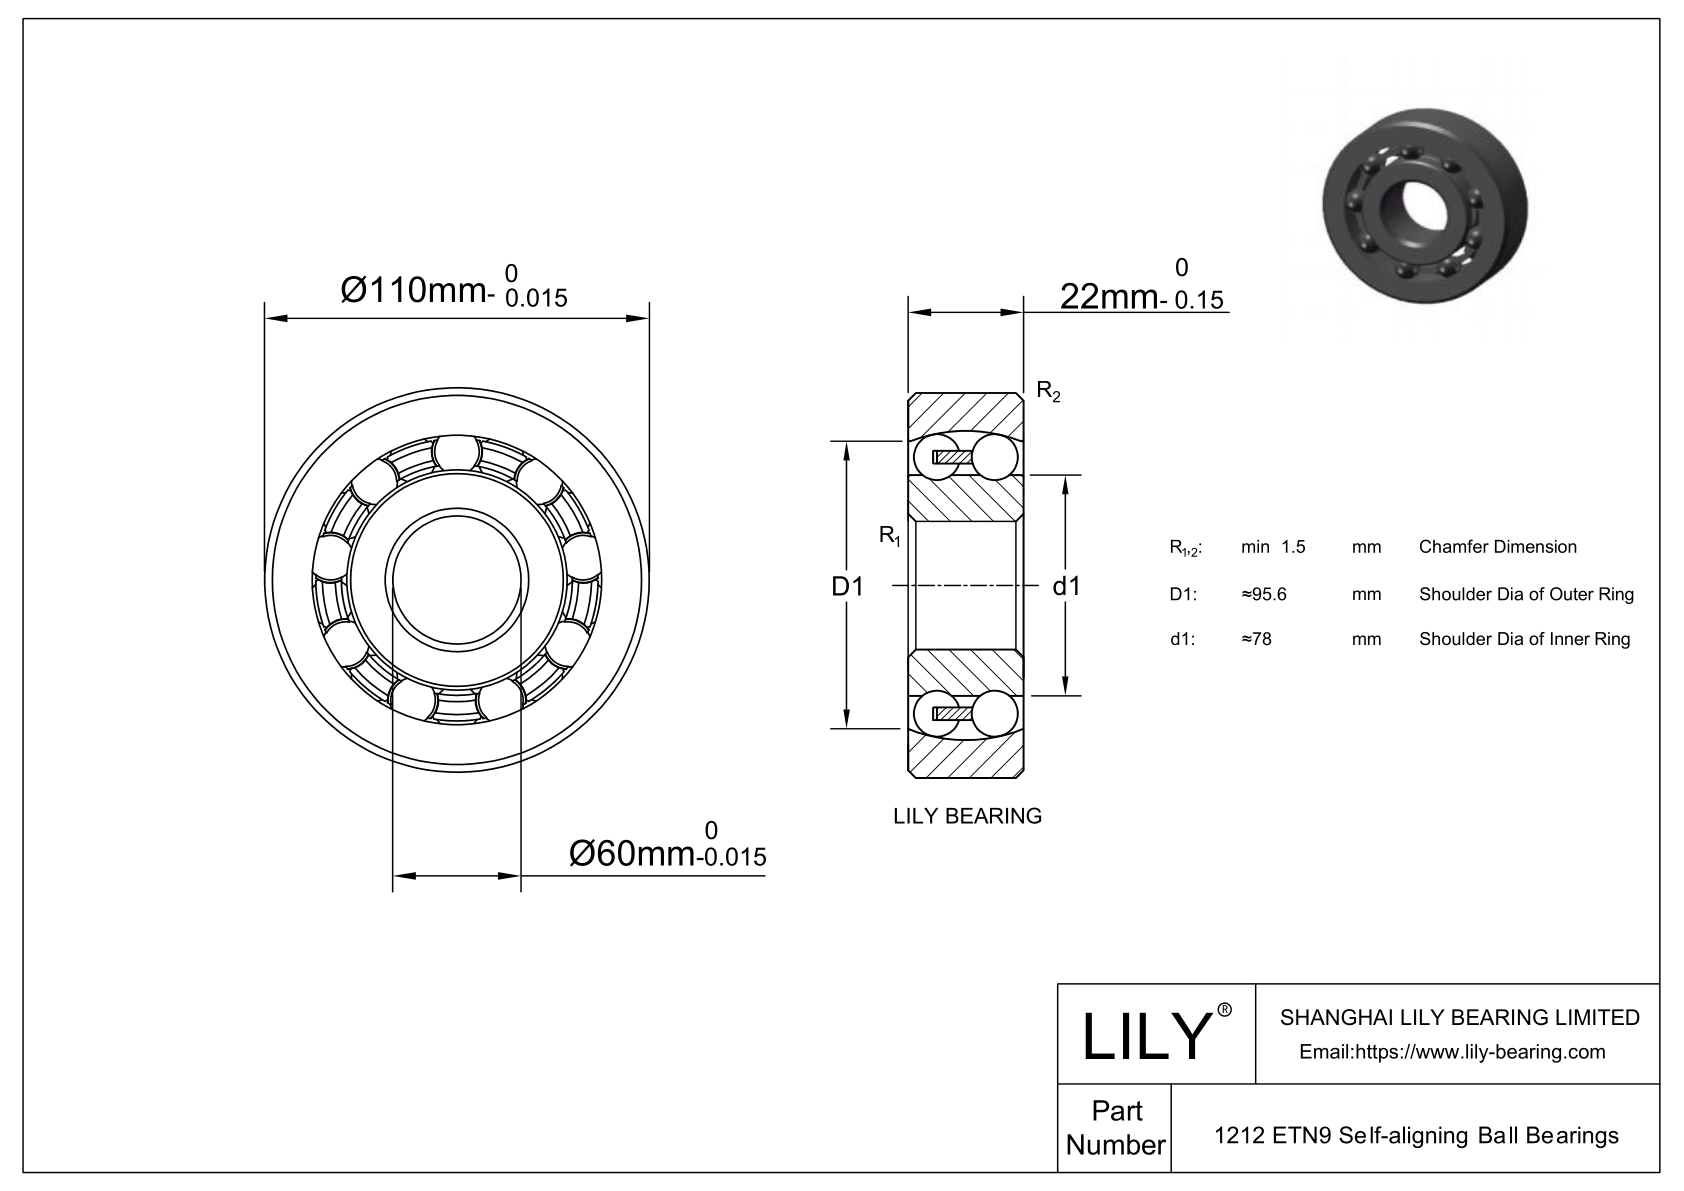 S1212 ETN9 Stainless Steel Self Aligning Ball Bearings cad drawing